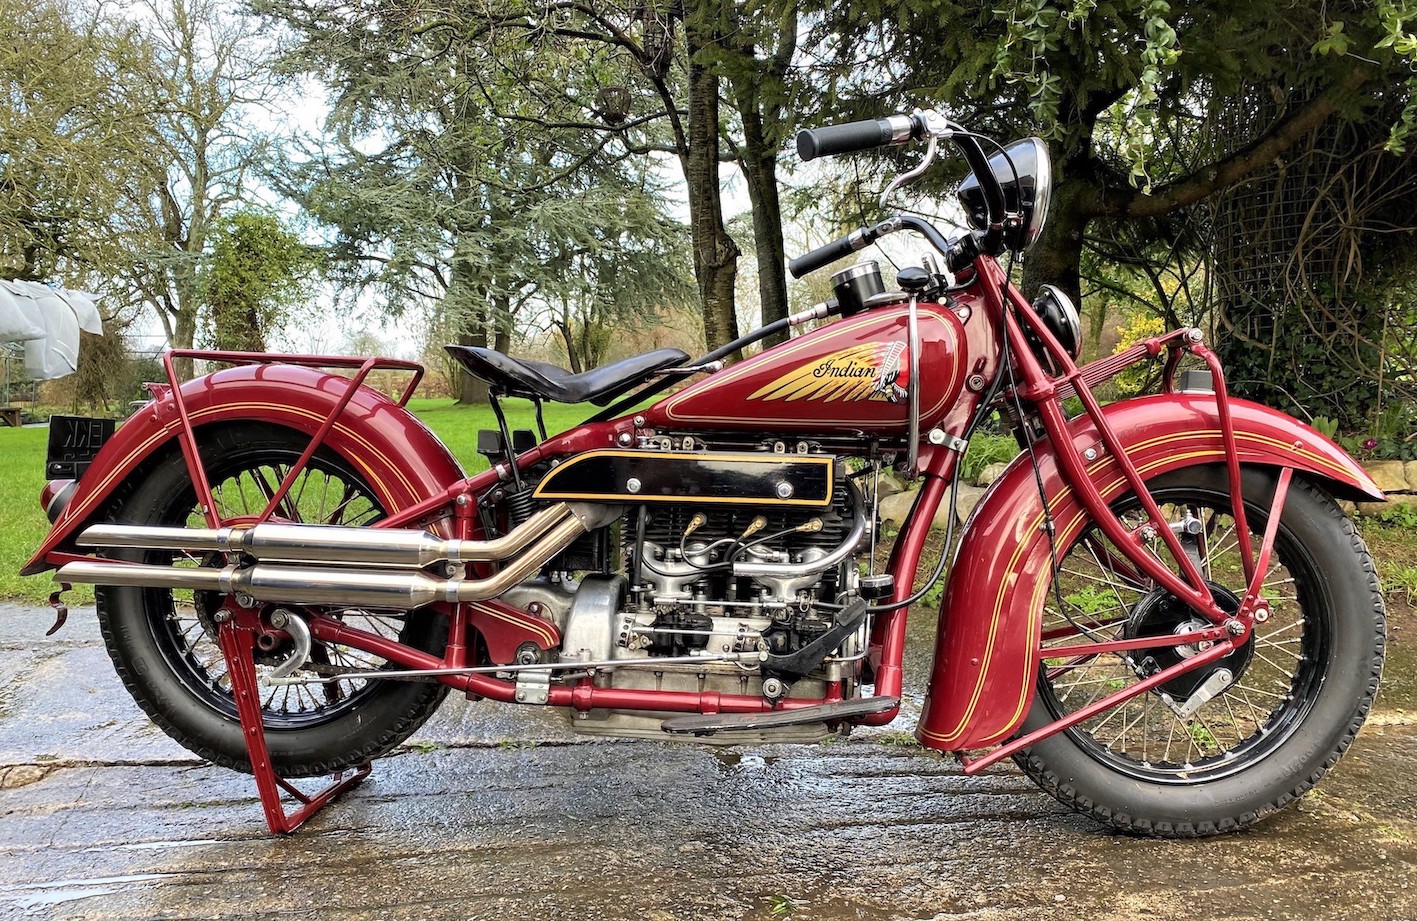 1937 Indian Four available at auction